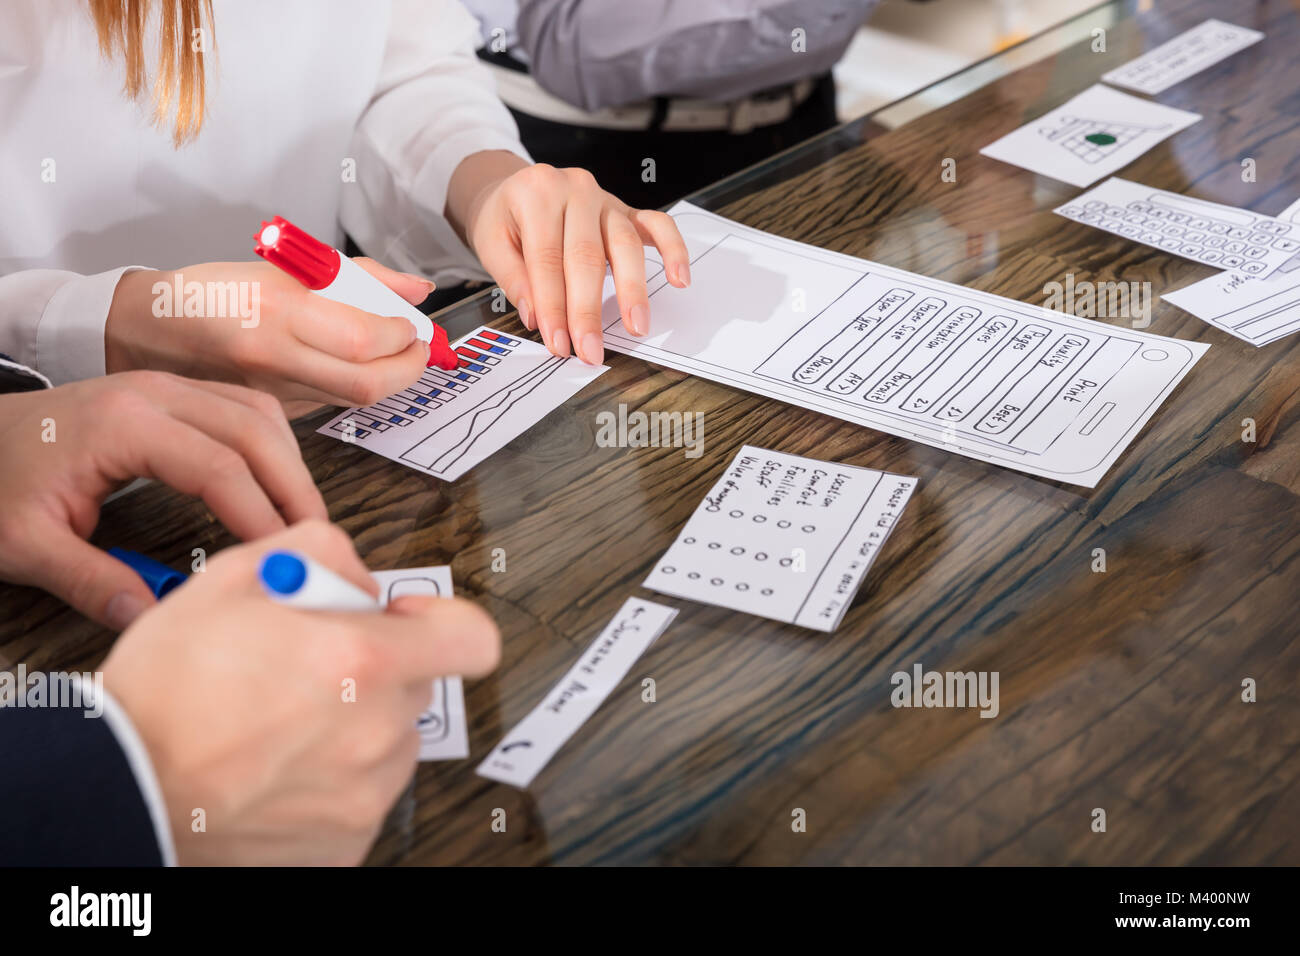 Designers Developing Mobile Application On Paper Over Desk Stock Photo